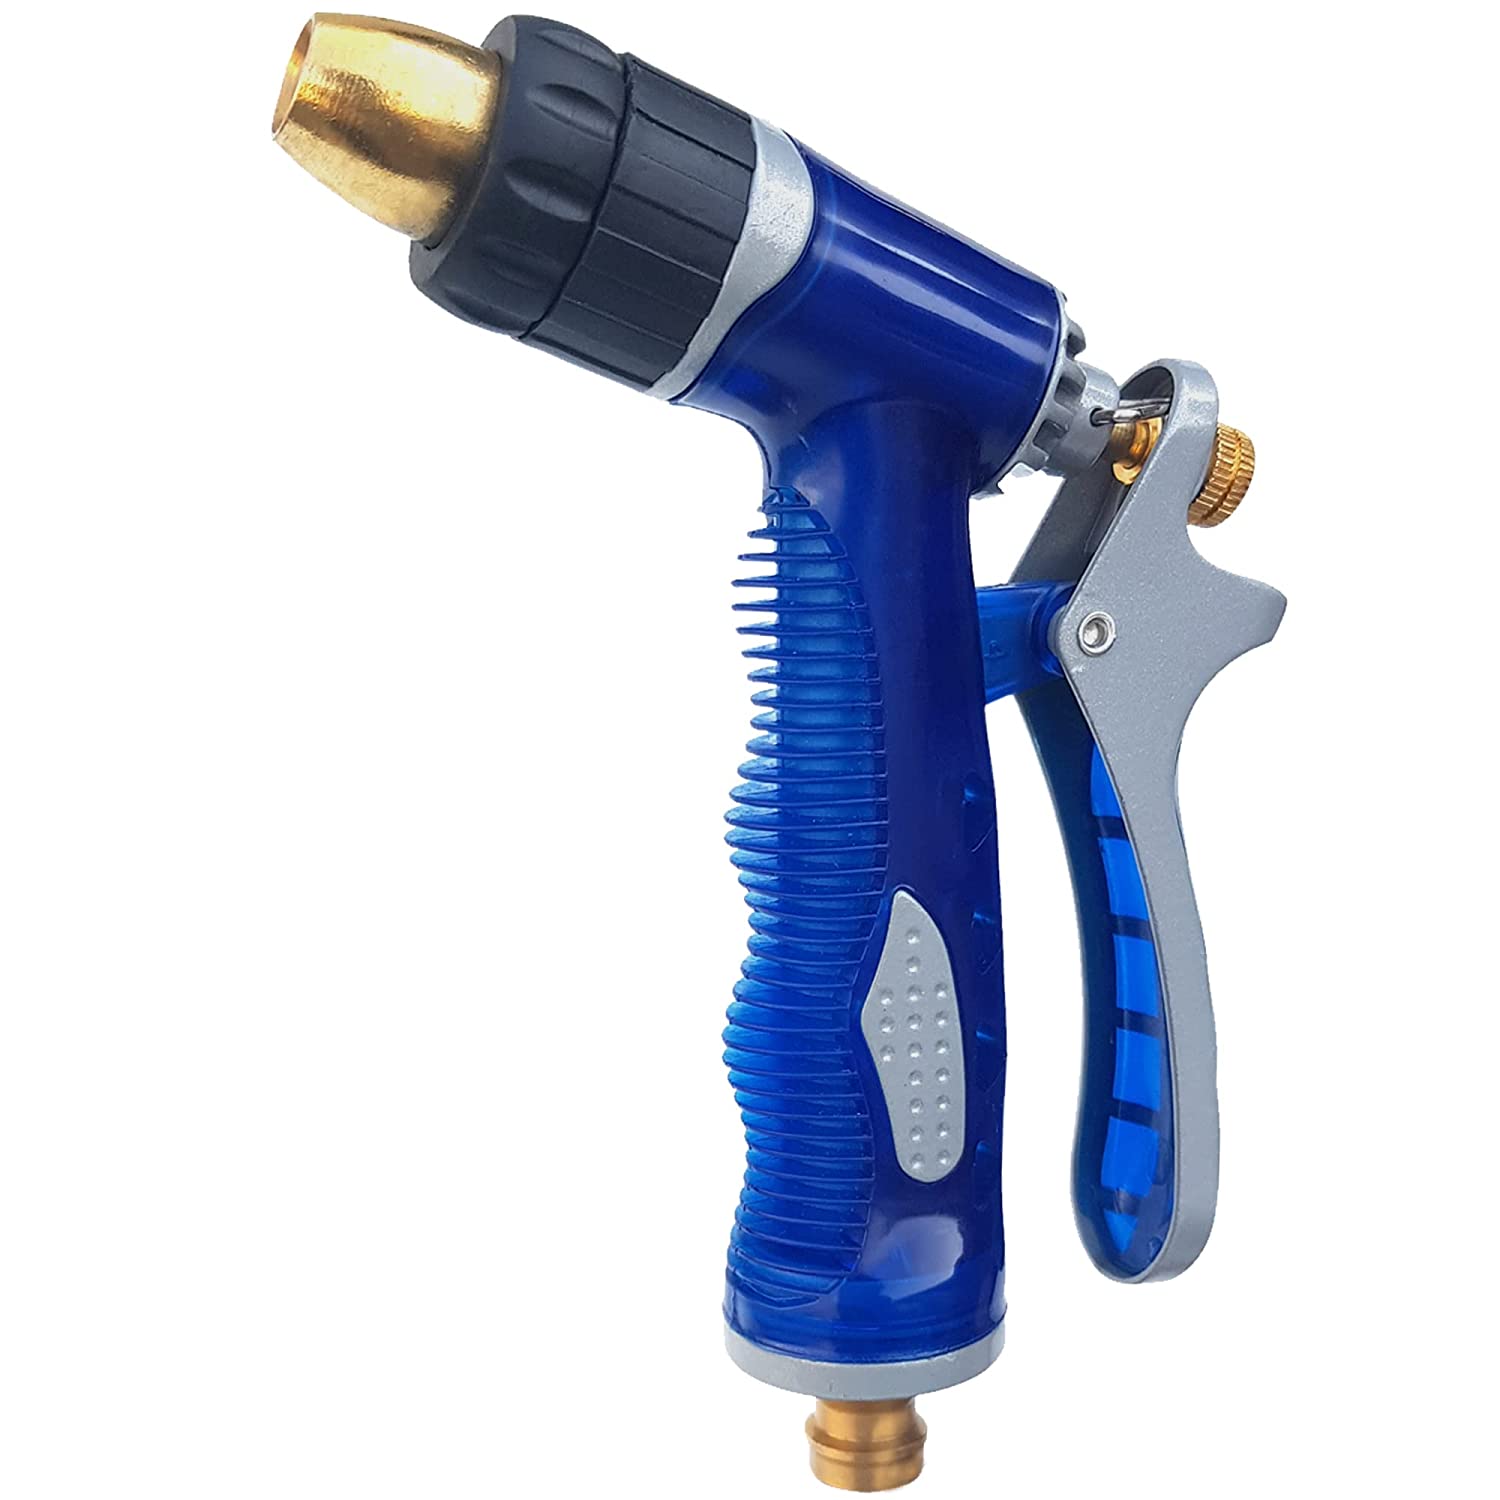 nirva with device of women picture garden hose nozzle heavy duty metal spray gun sprayer brass for car washing,plants watering,pets shower,floor cleaning(blue)